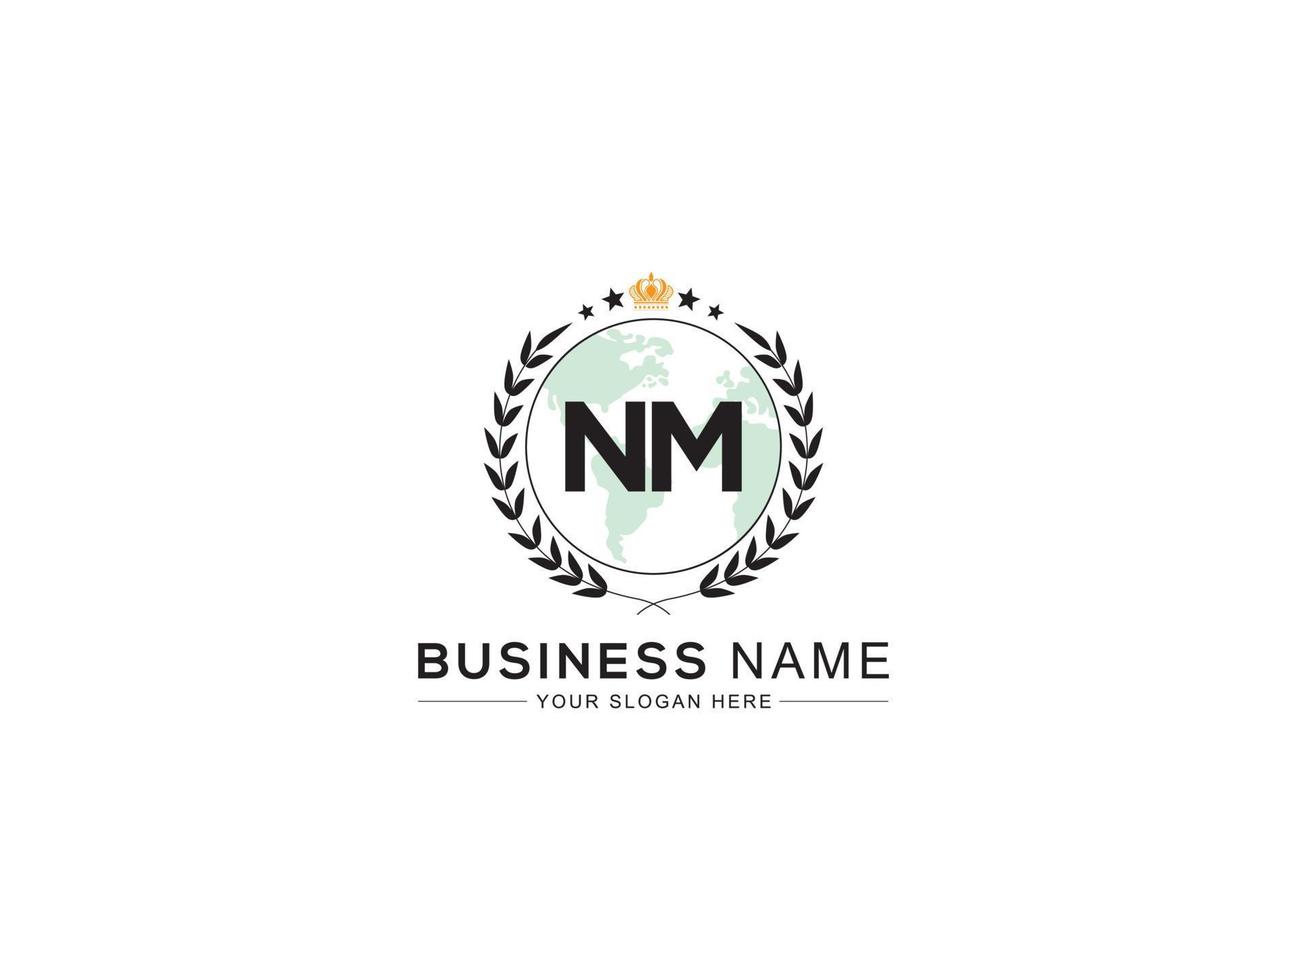 Minimalist Nm Logo Icon, Luxury Crown and Three Star NM Business Logo Letter Design vector